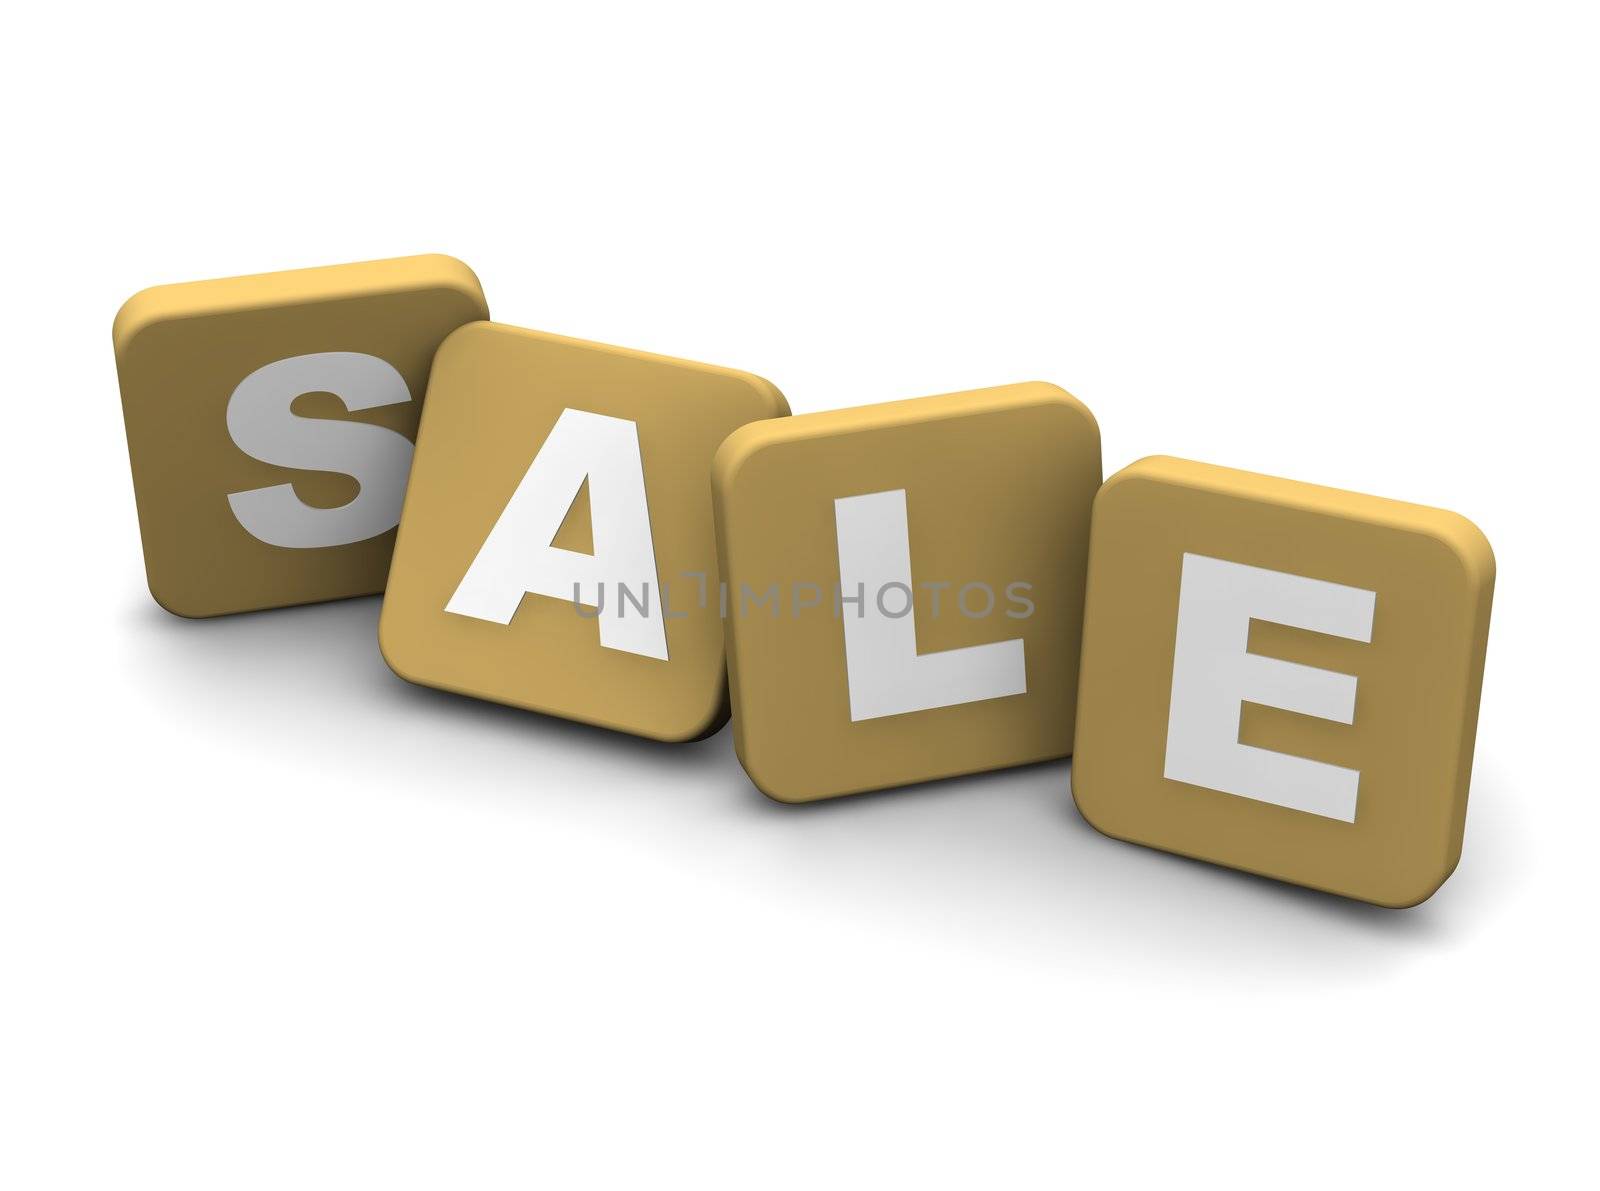 Sale text. 3d rendered illustration isolated on white.